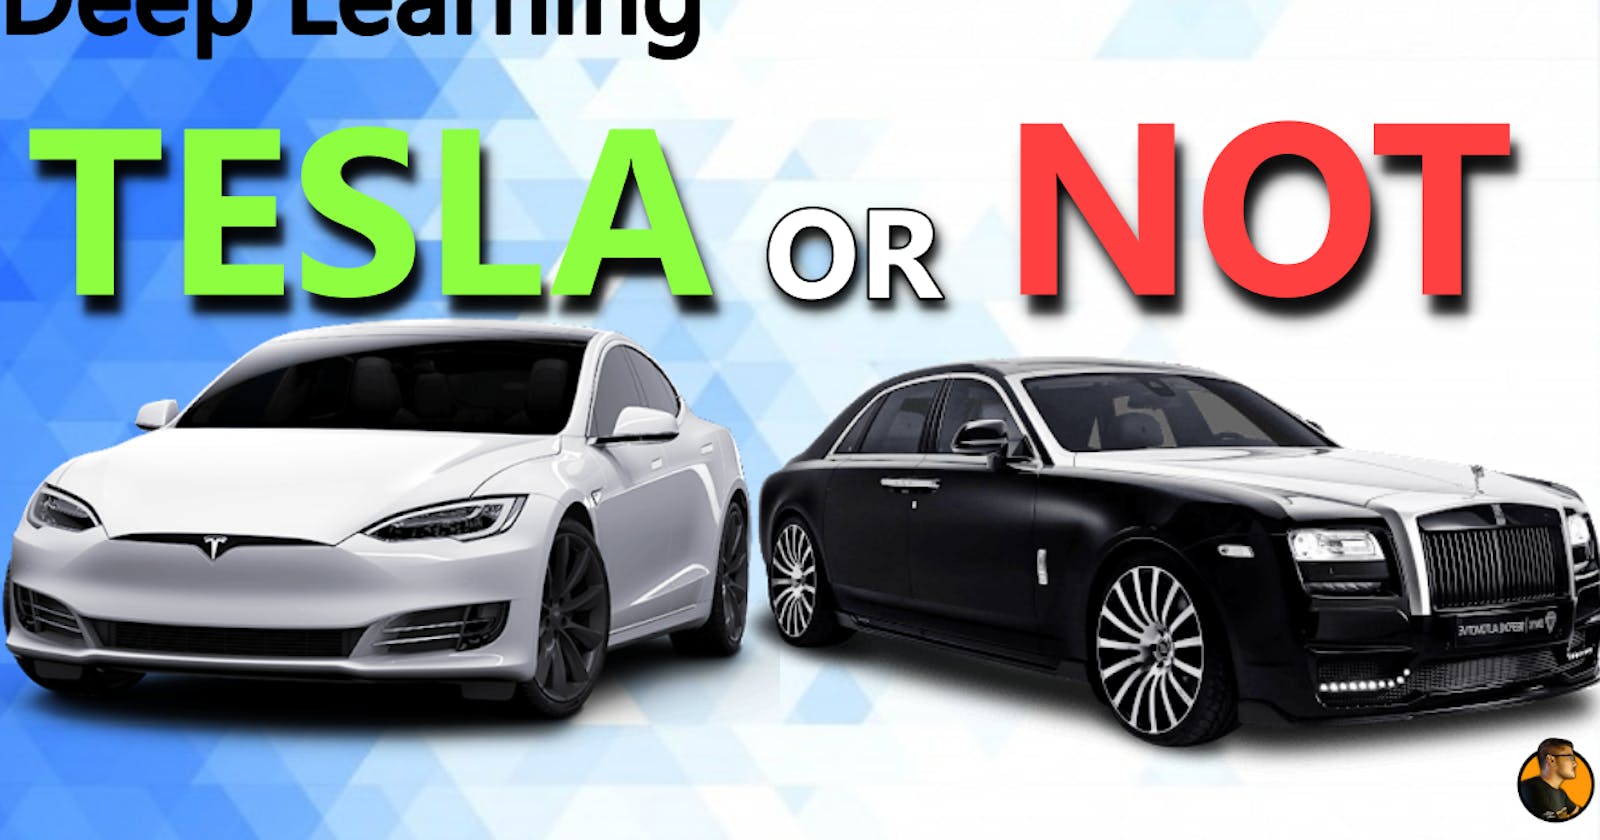 Detecting a Car is TESLA or NOT using Deep Learning with Fast.AI